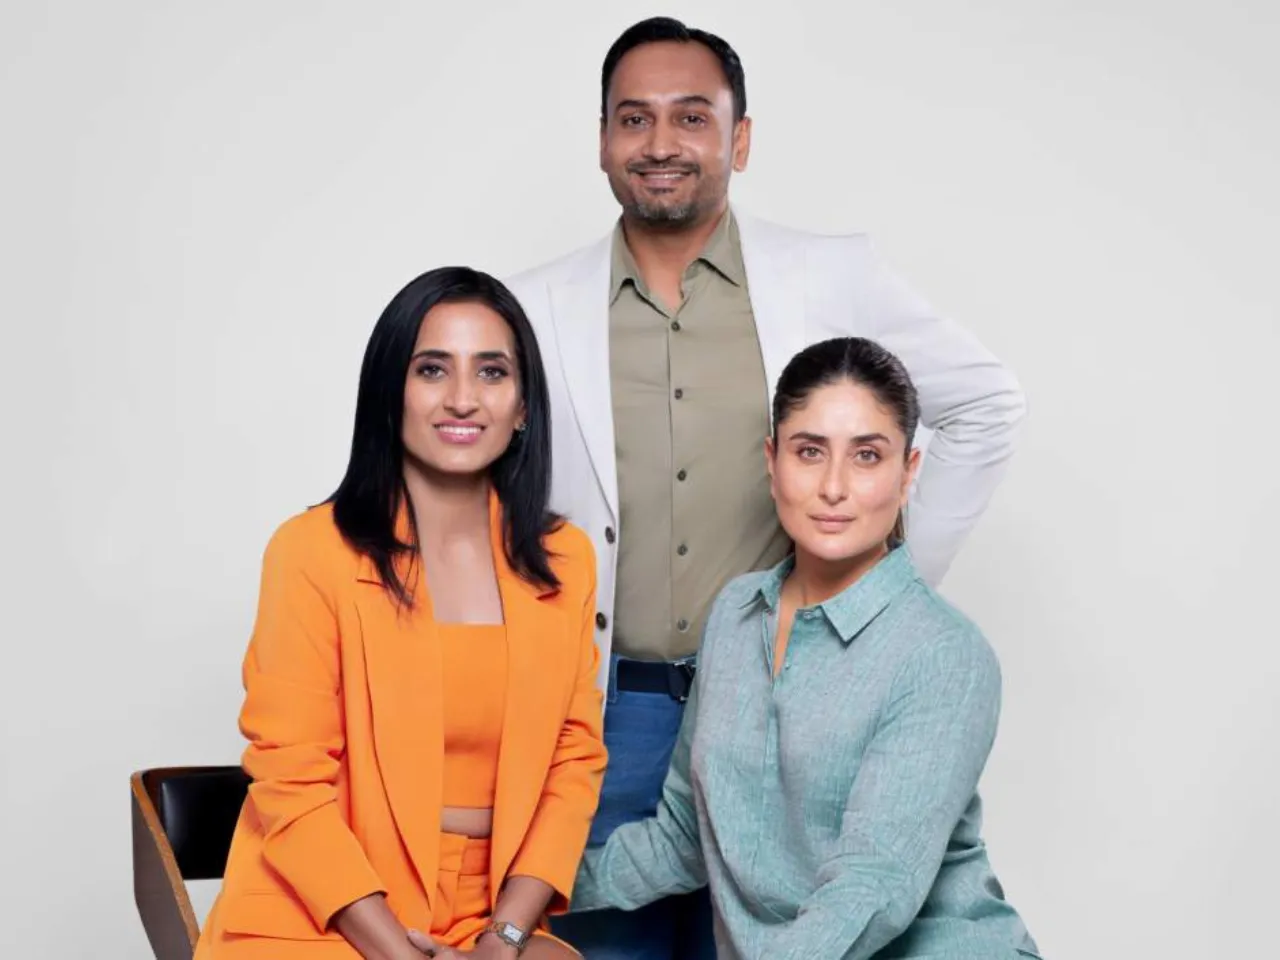 Vineeta Singh, Co-founder & CEO SUGAR Cosmetics ; Kaushik Mukherjee, Co-Founder & COO, SUGAR Cosmetics ; Kareena Kapoor Khan, Co-Owner and Investor, Quench Botanics (1)